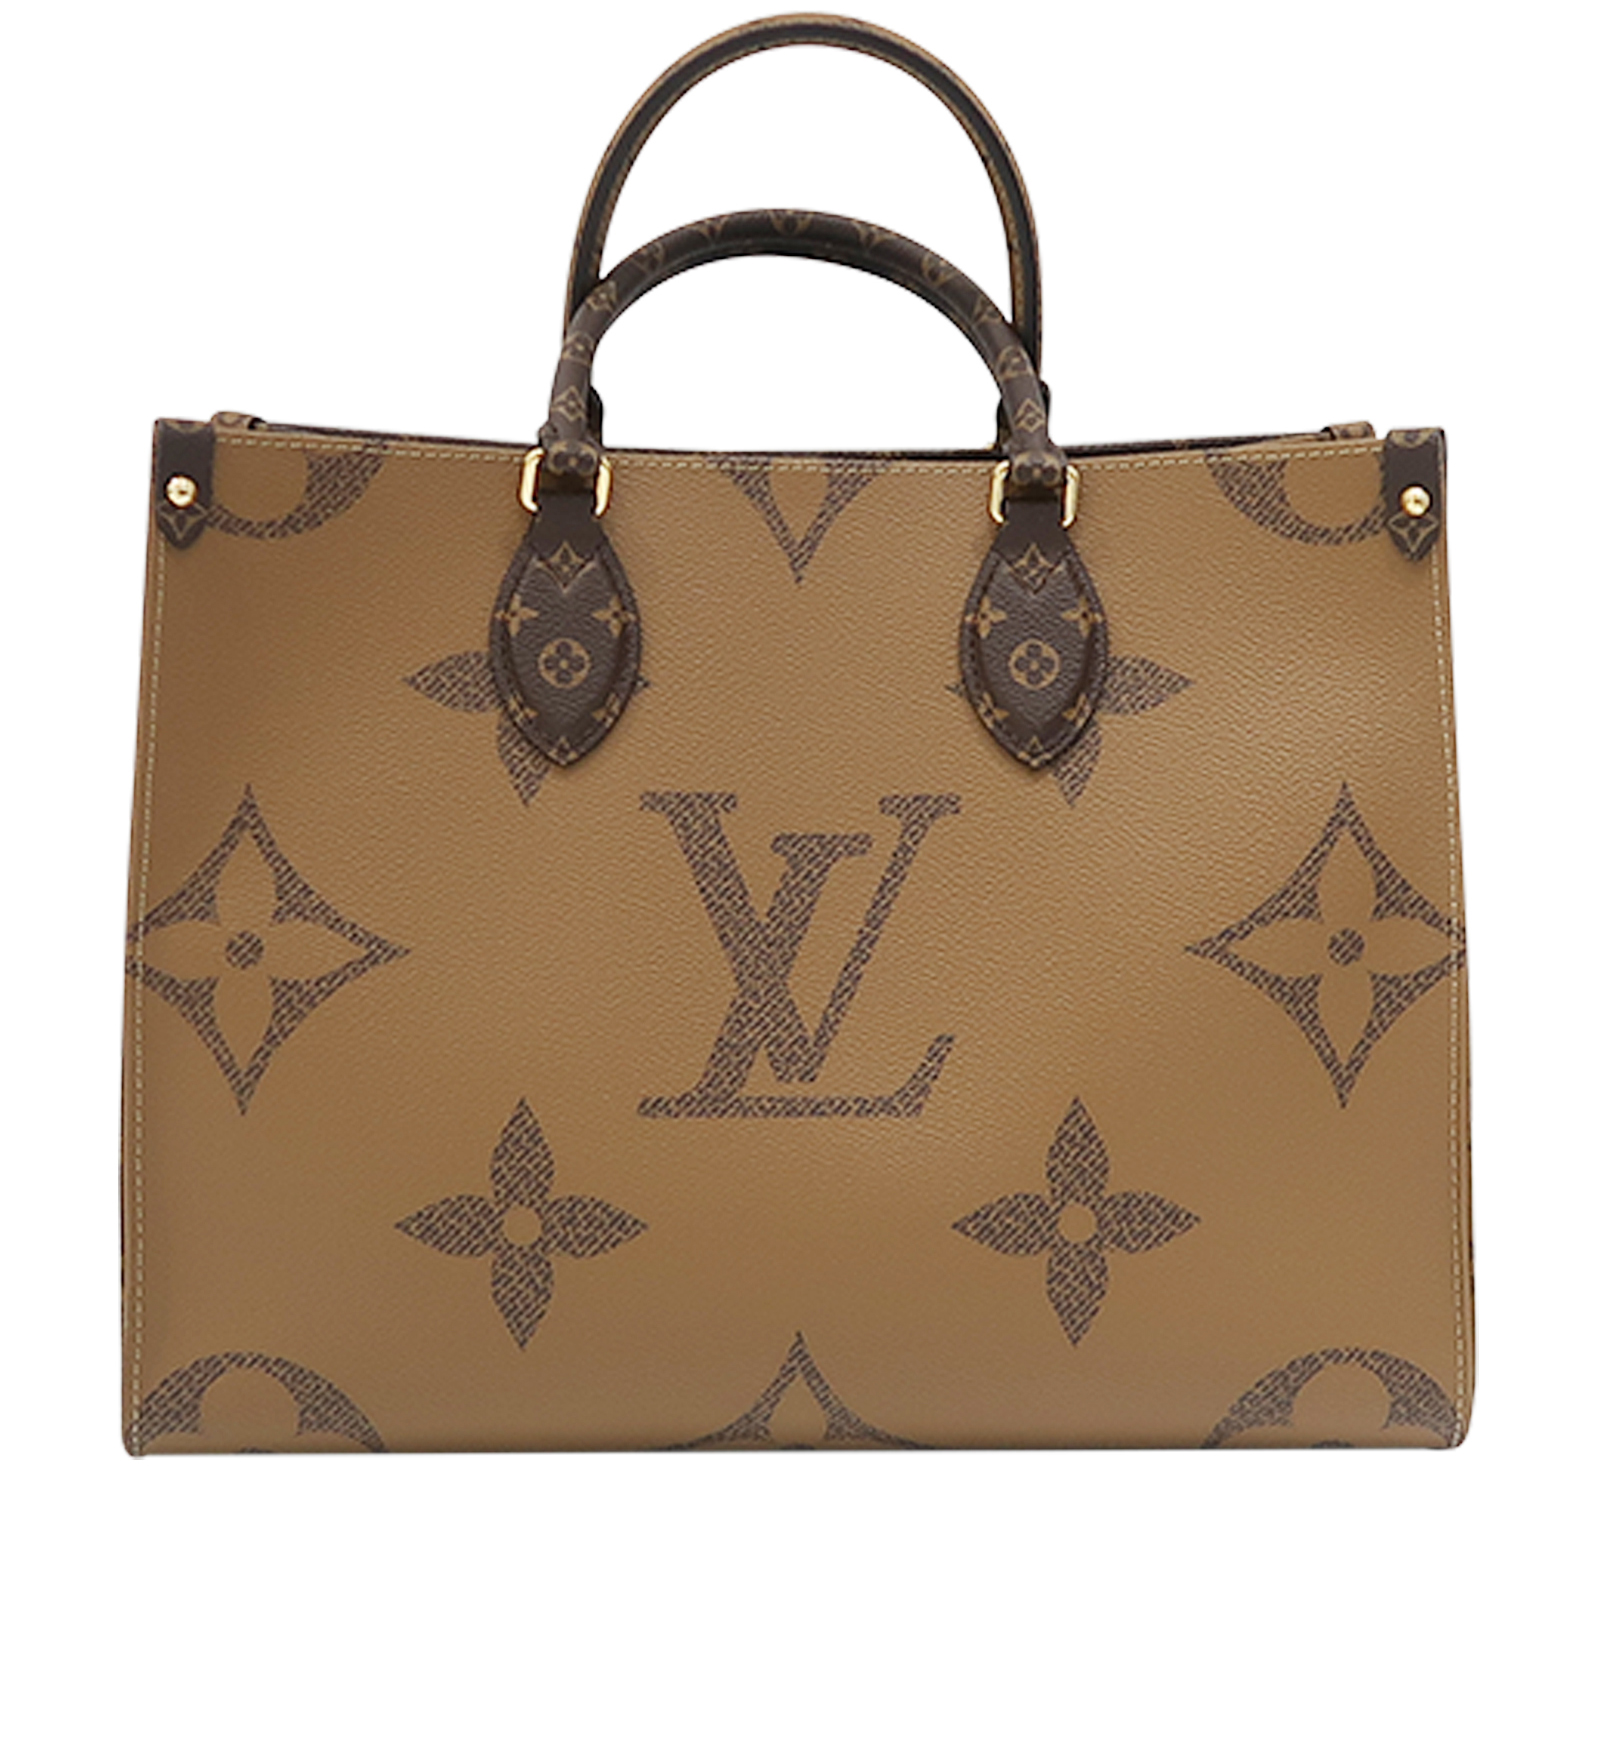 Designer Exchange Ltd - If you're looking for an ultra limited LV